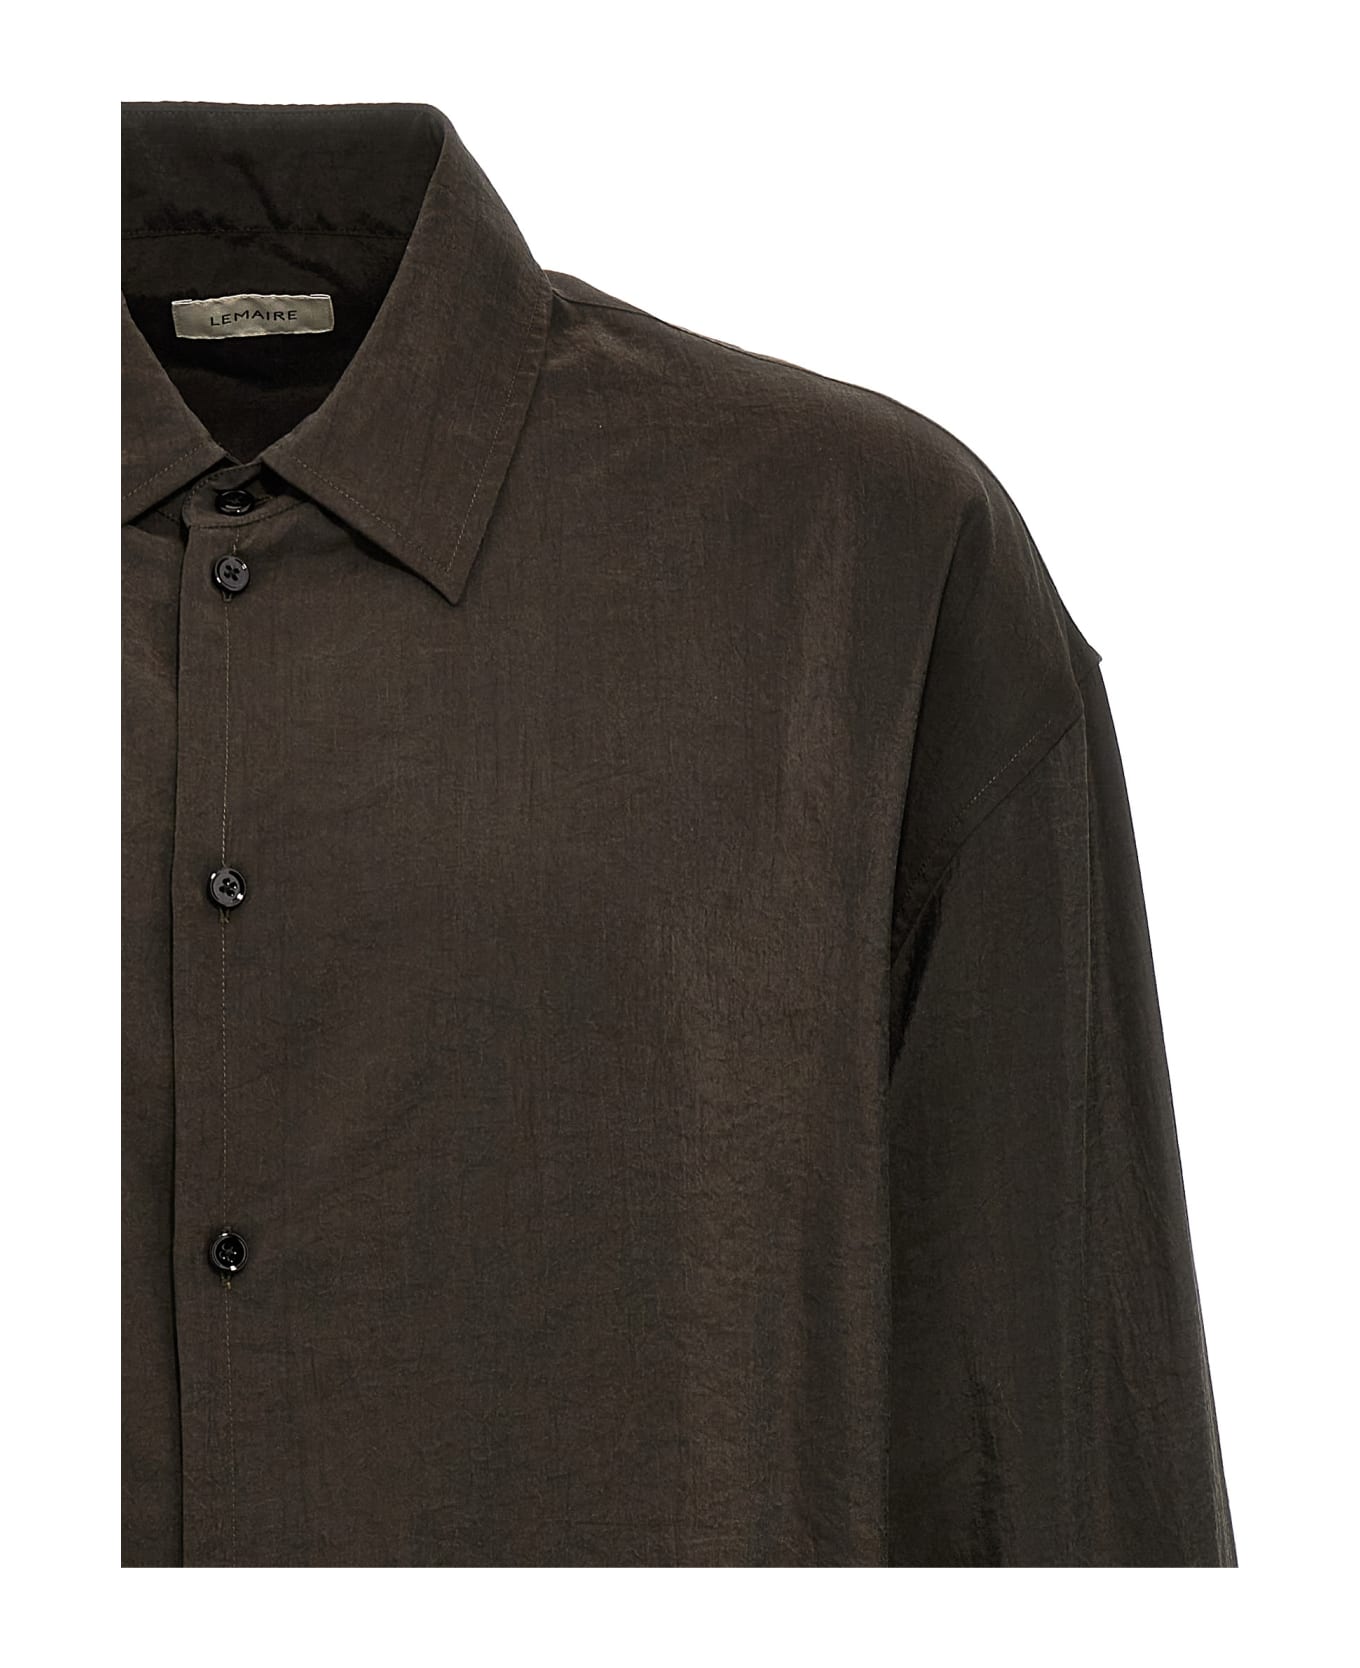 Lemaire 'twisted' Shirt - Brown シャツ